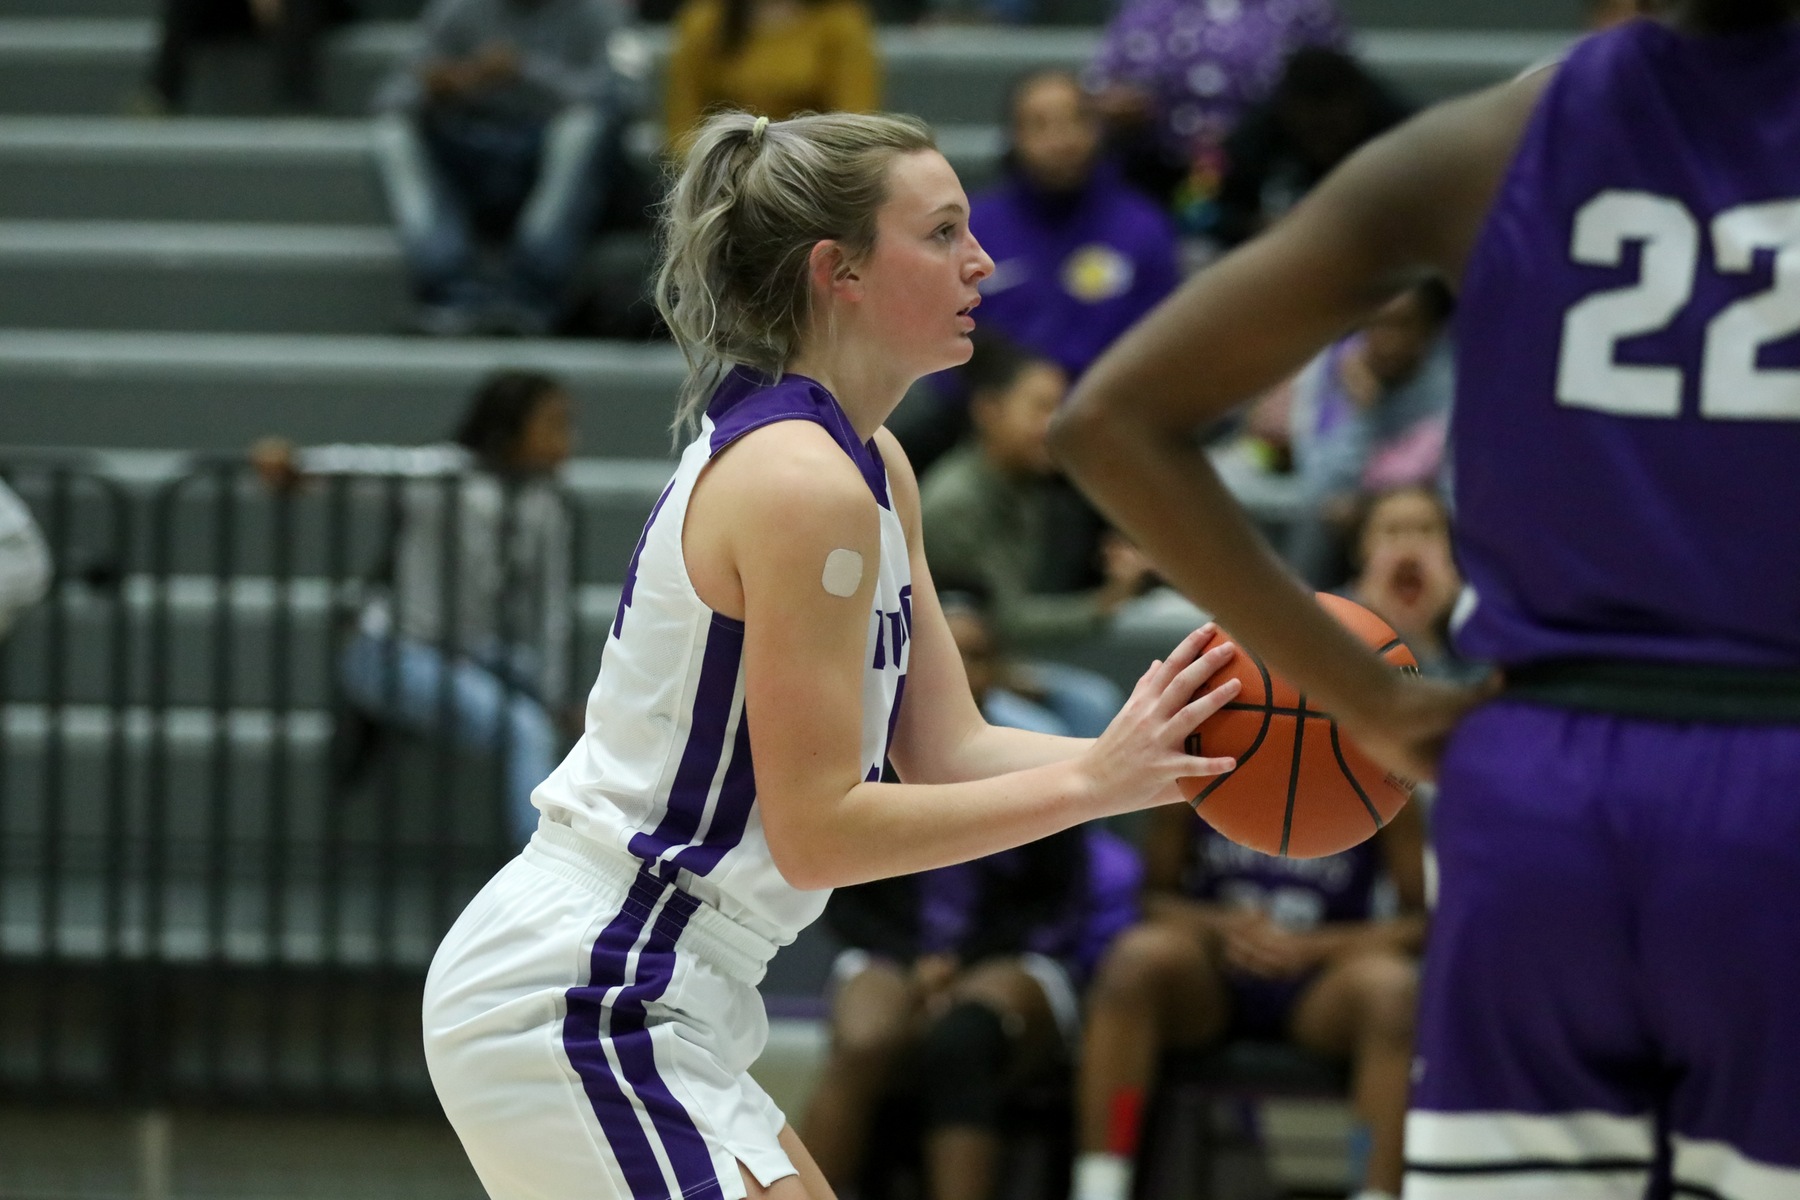 No. 8/8 @bhsdogsghoops comes up short against No. 7/7 Hamilton Southeastern